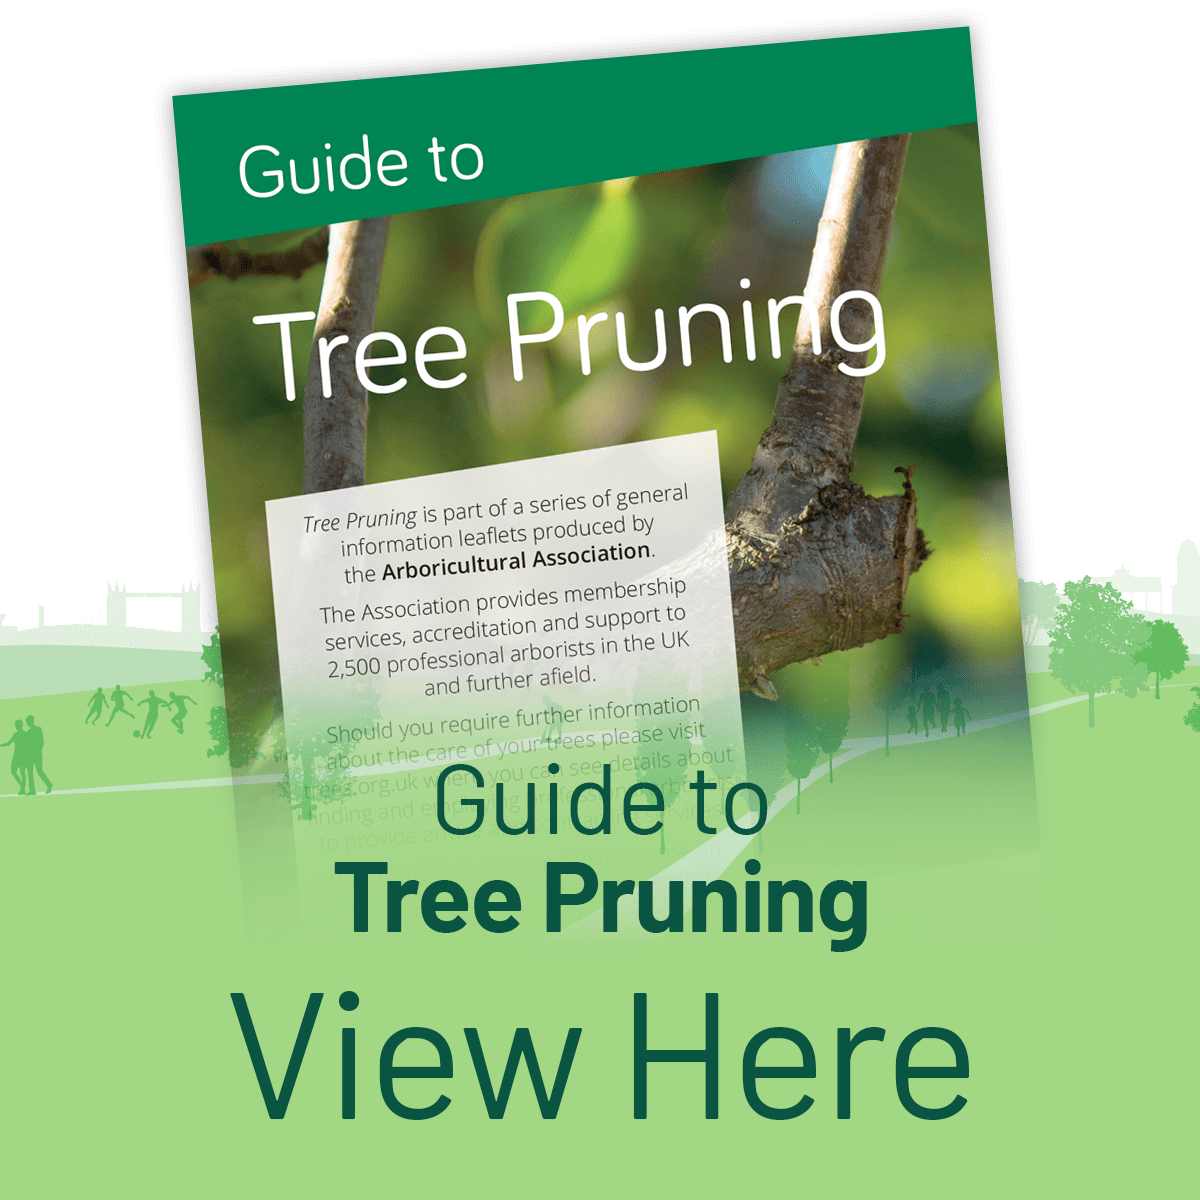 View the Guide to Pruning